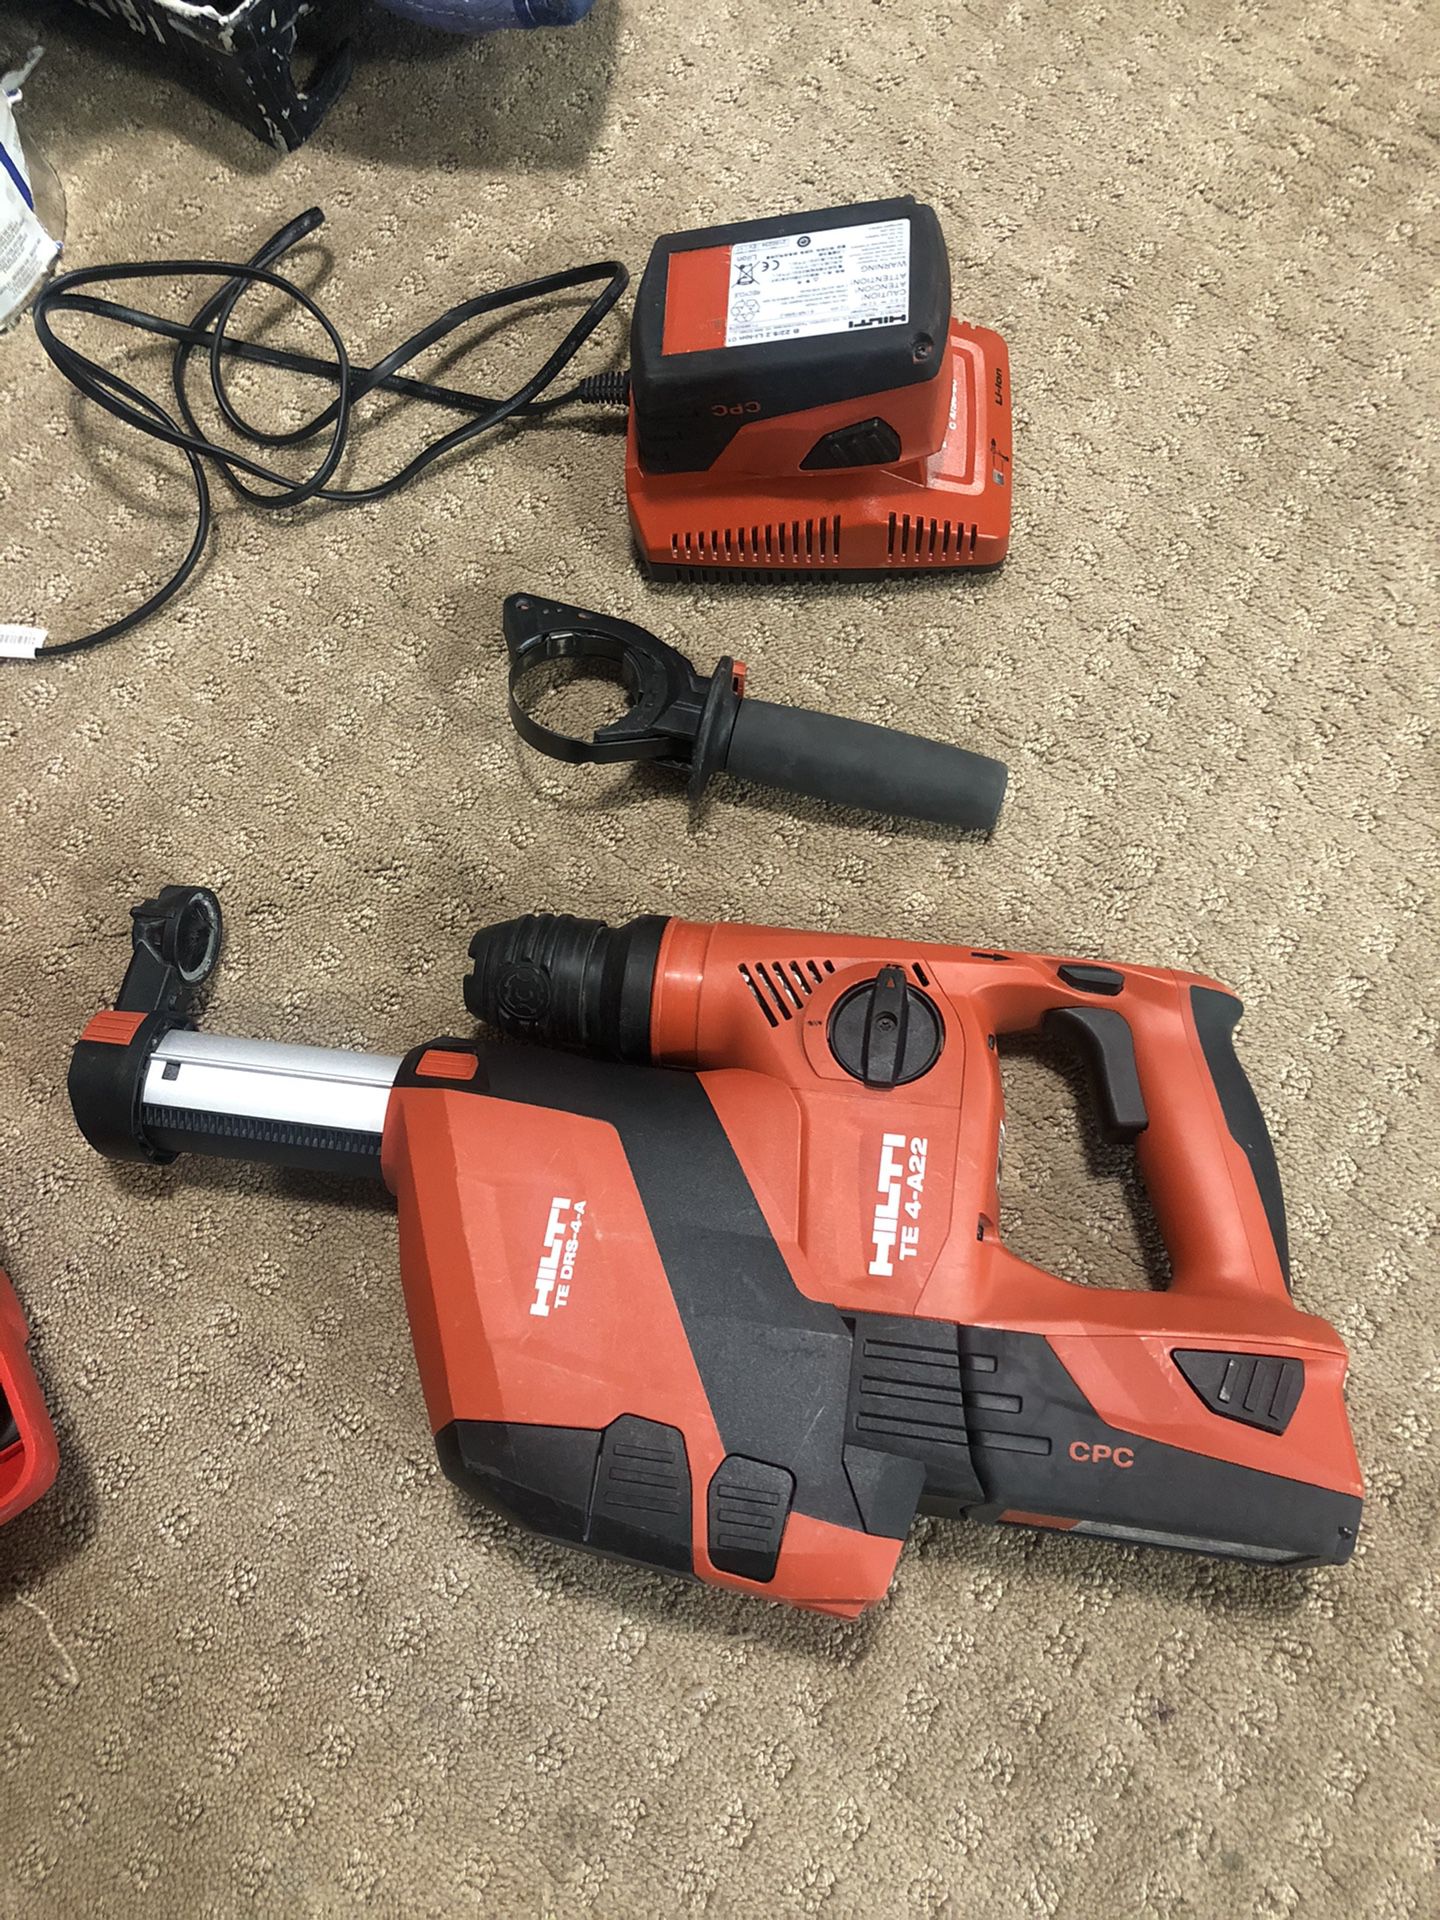 Hilti hammer drill with vaccun